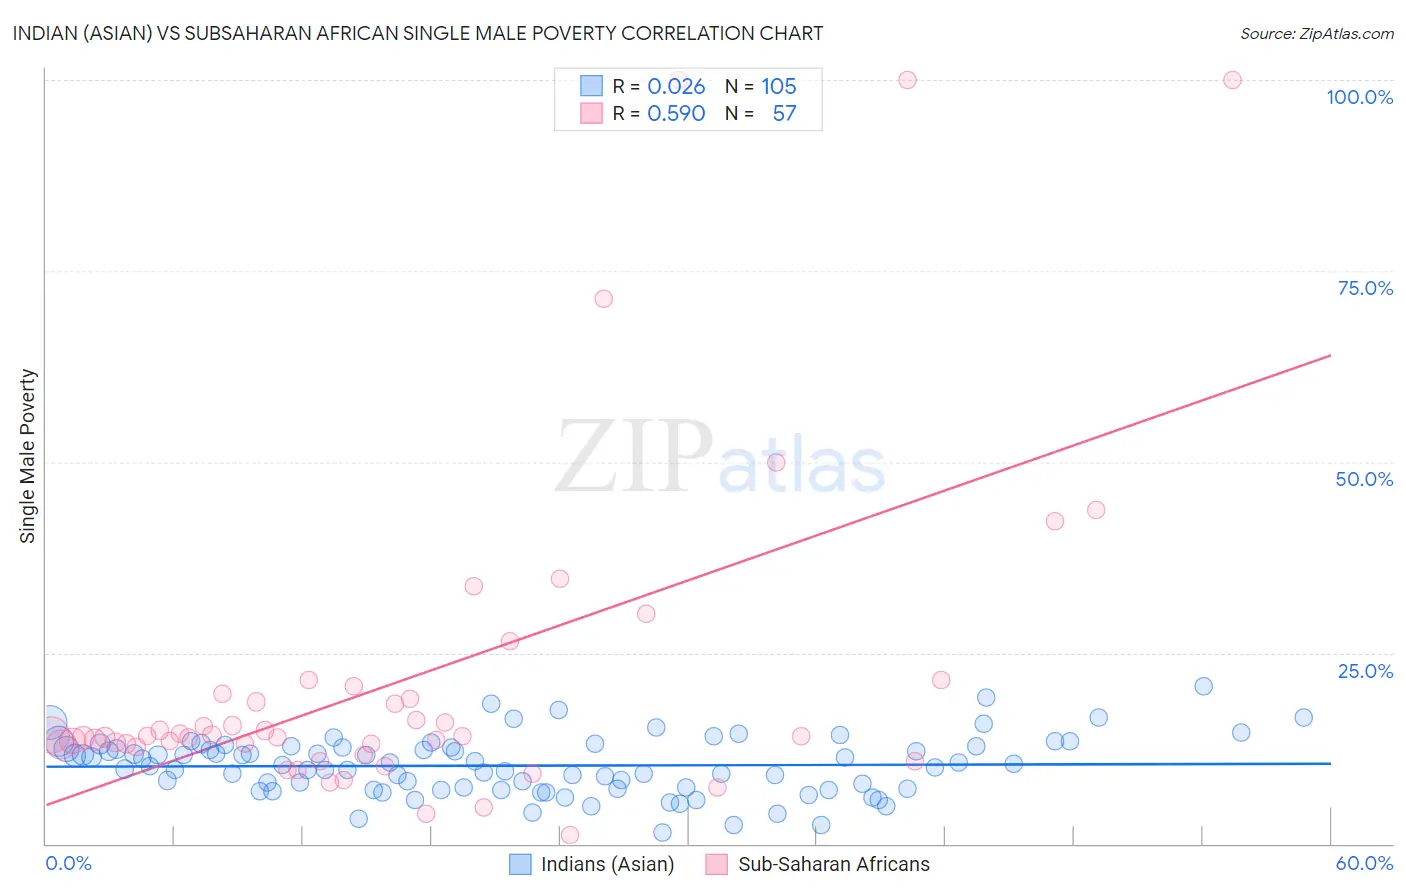 Indian (Asian) vs Subsaharan African Single Male Poverty